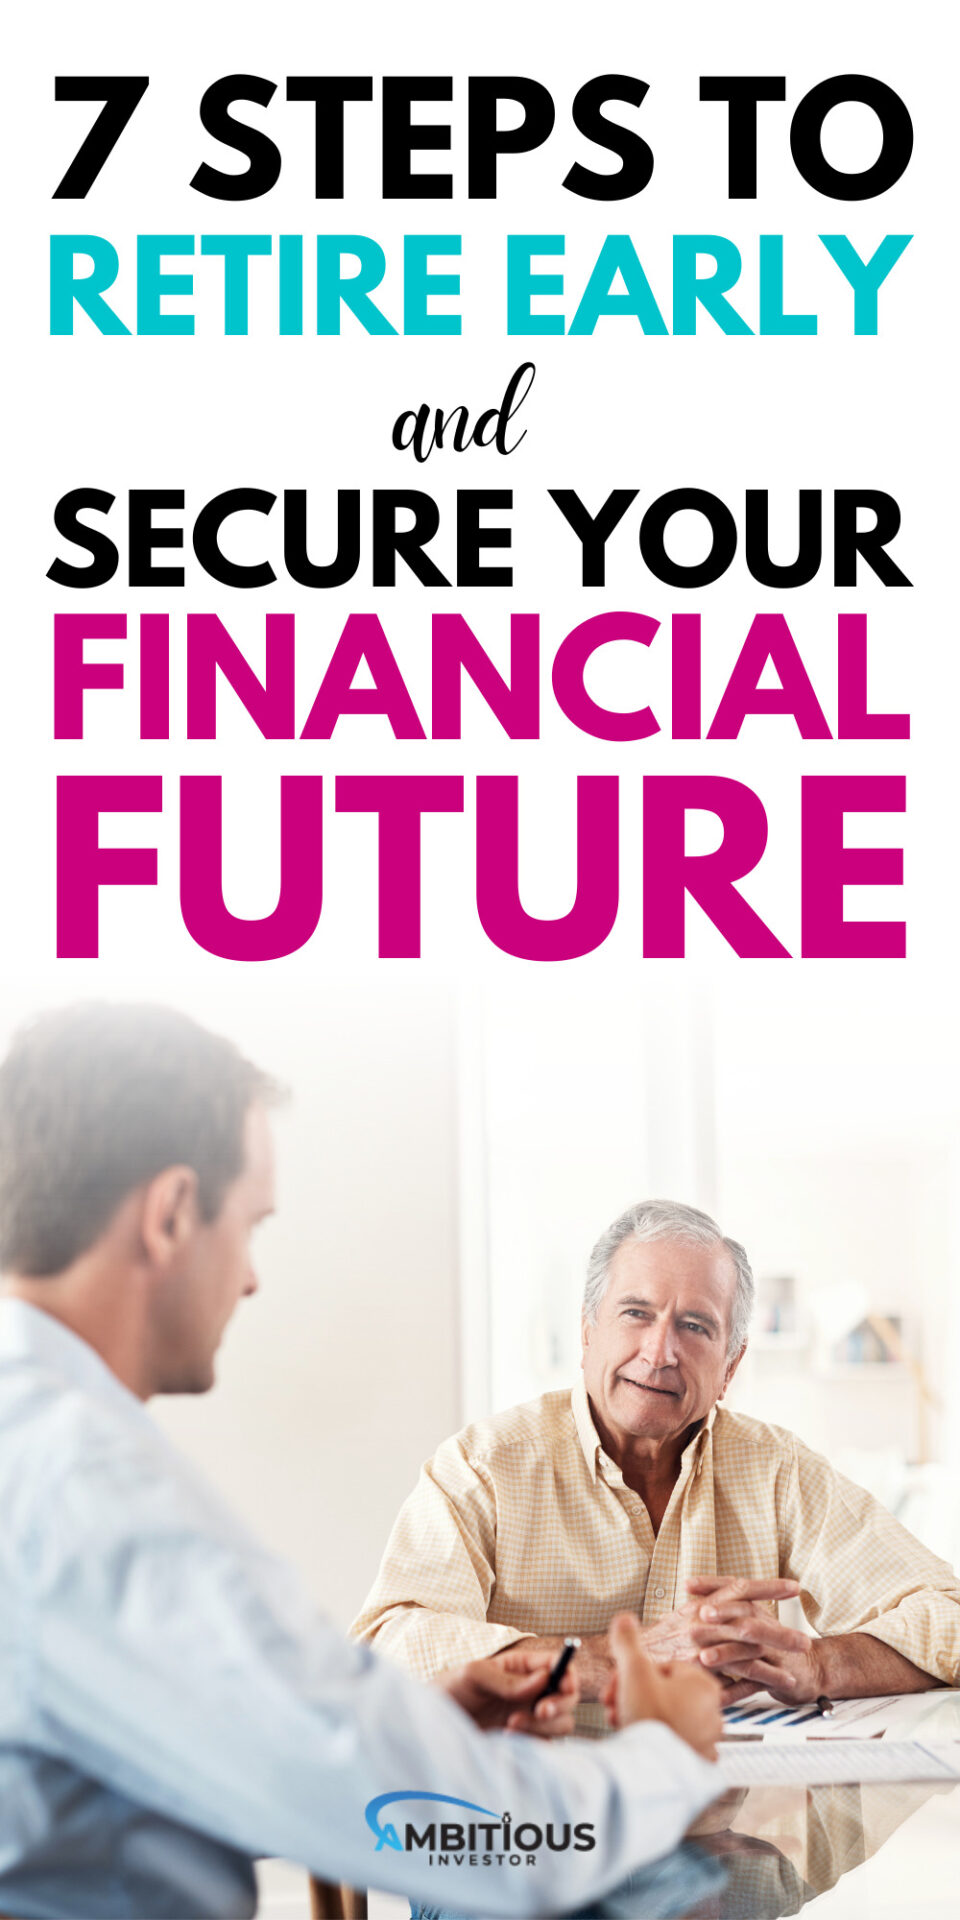 7 Steps to Retire Early and Secure Your Financial Future 